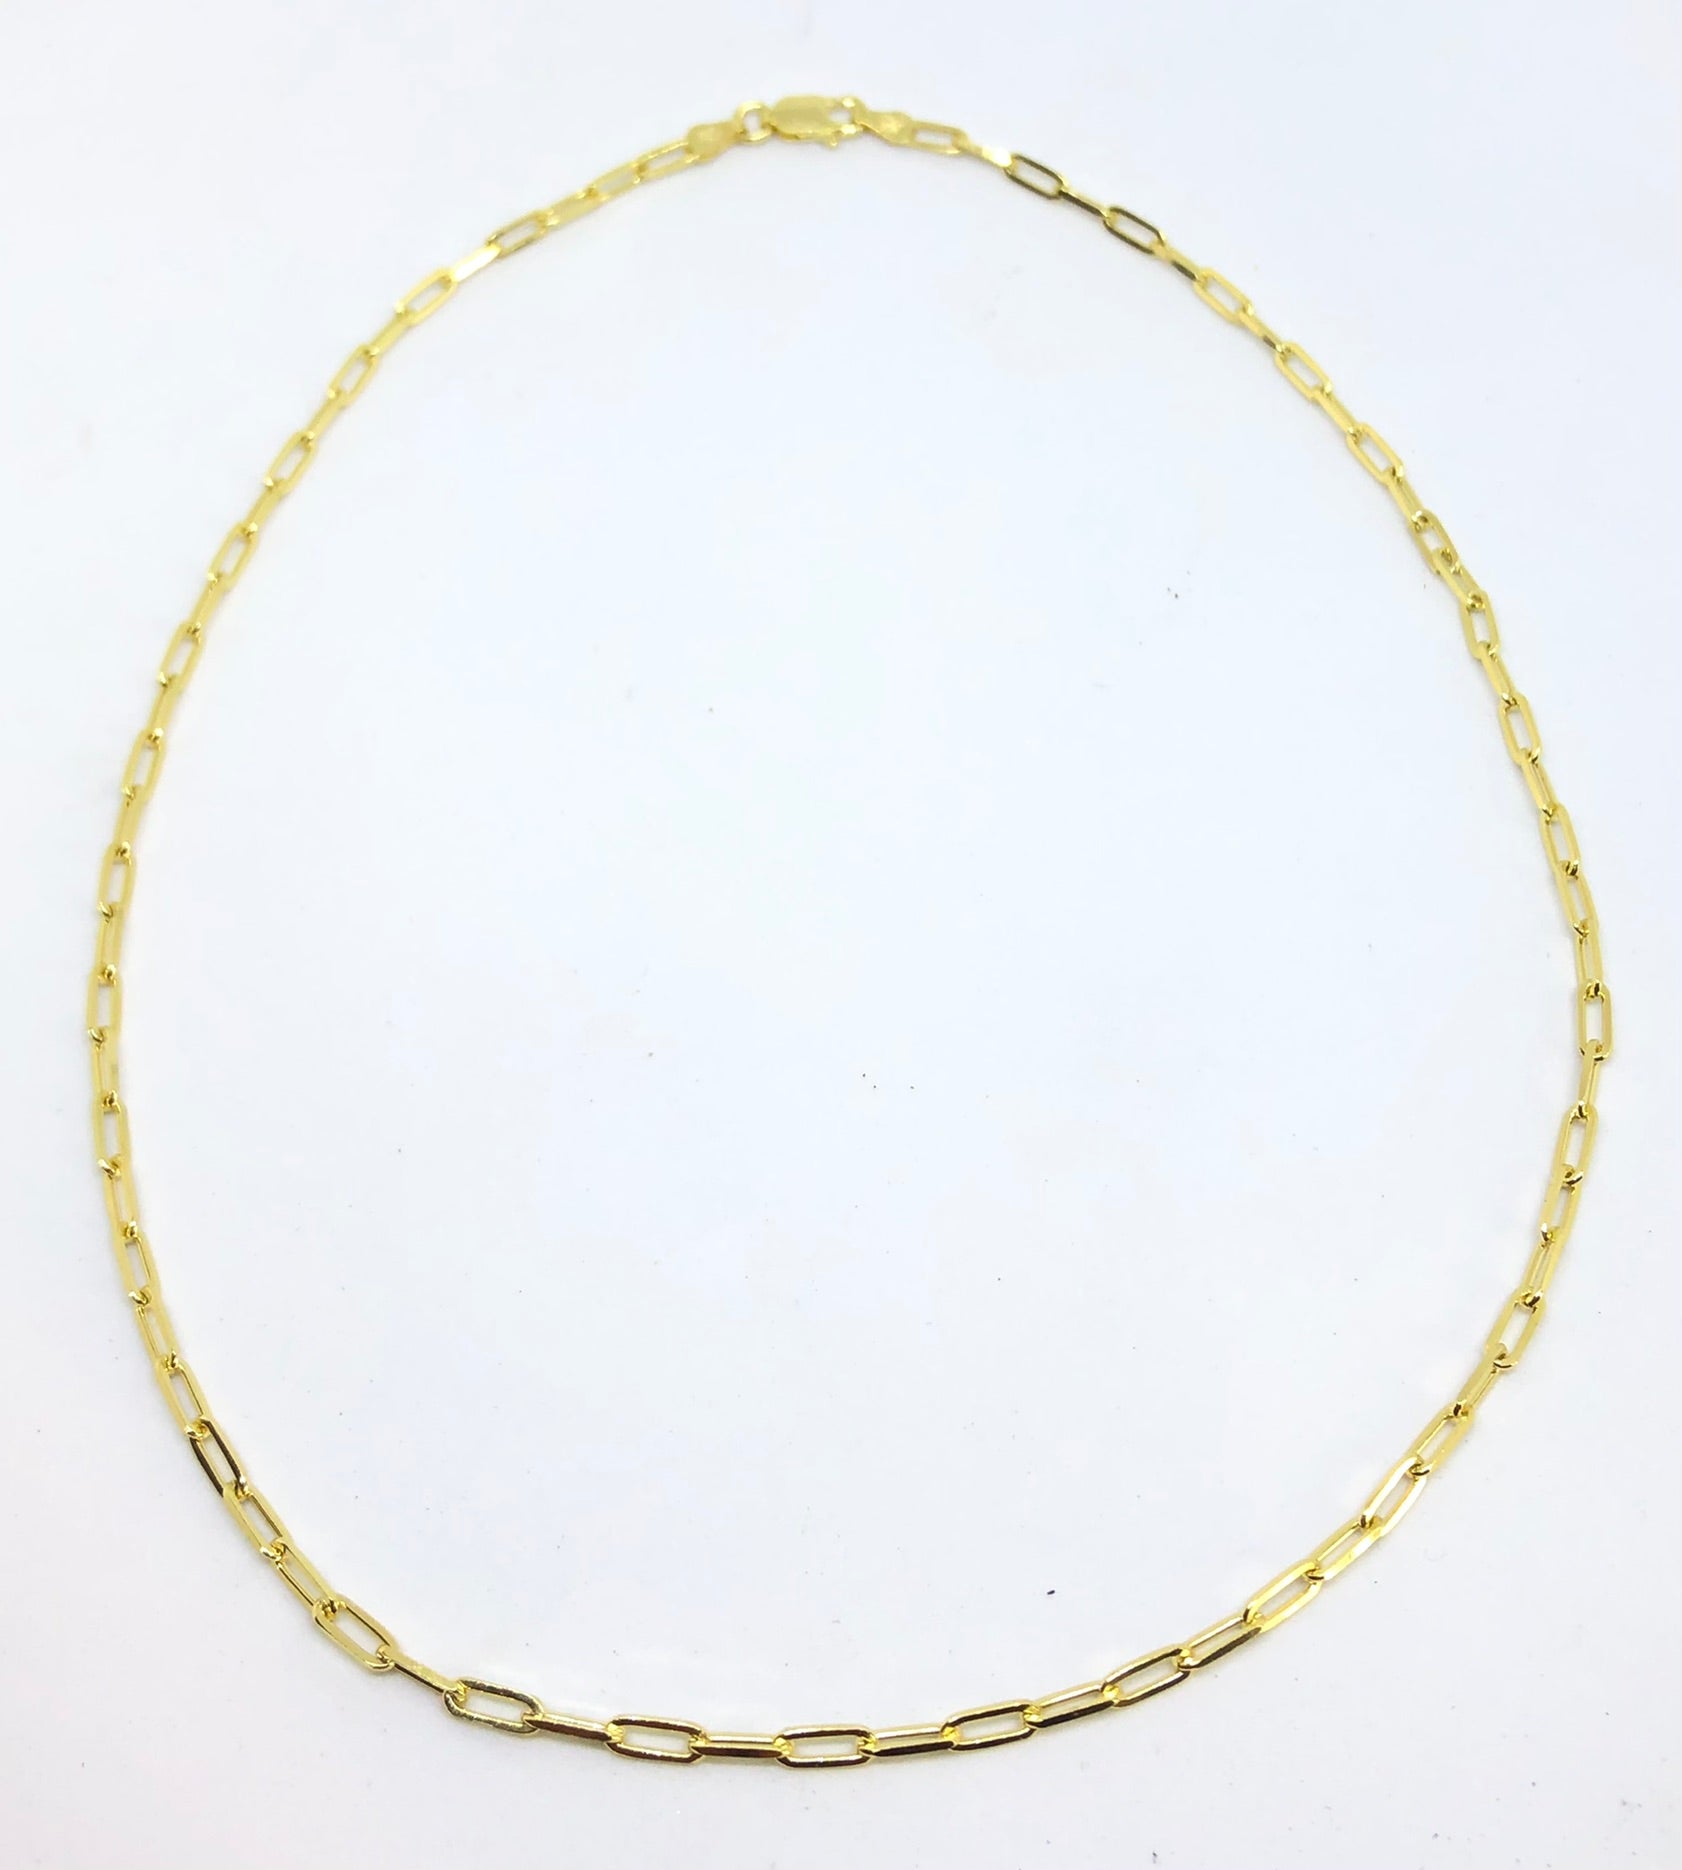 18k Gold Plated Stainless Steel 2mm Cable Chain Necklace - 16 inch SS03g-16